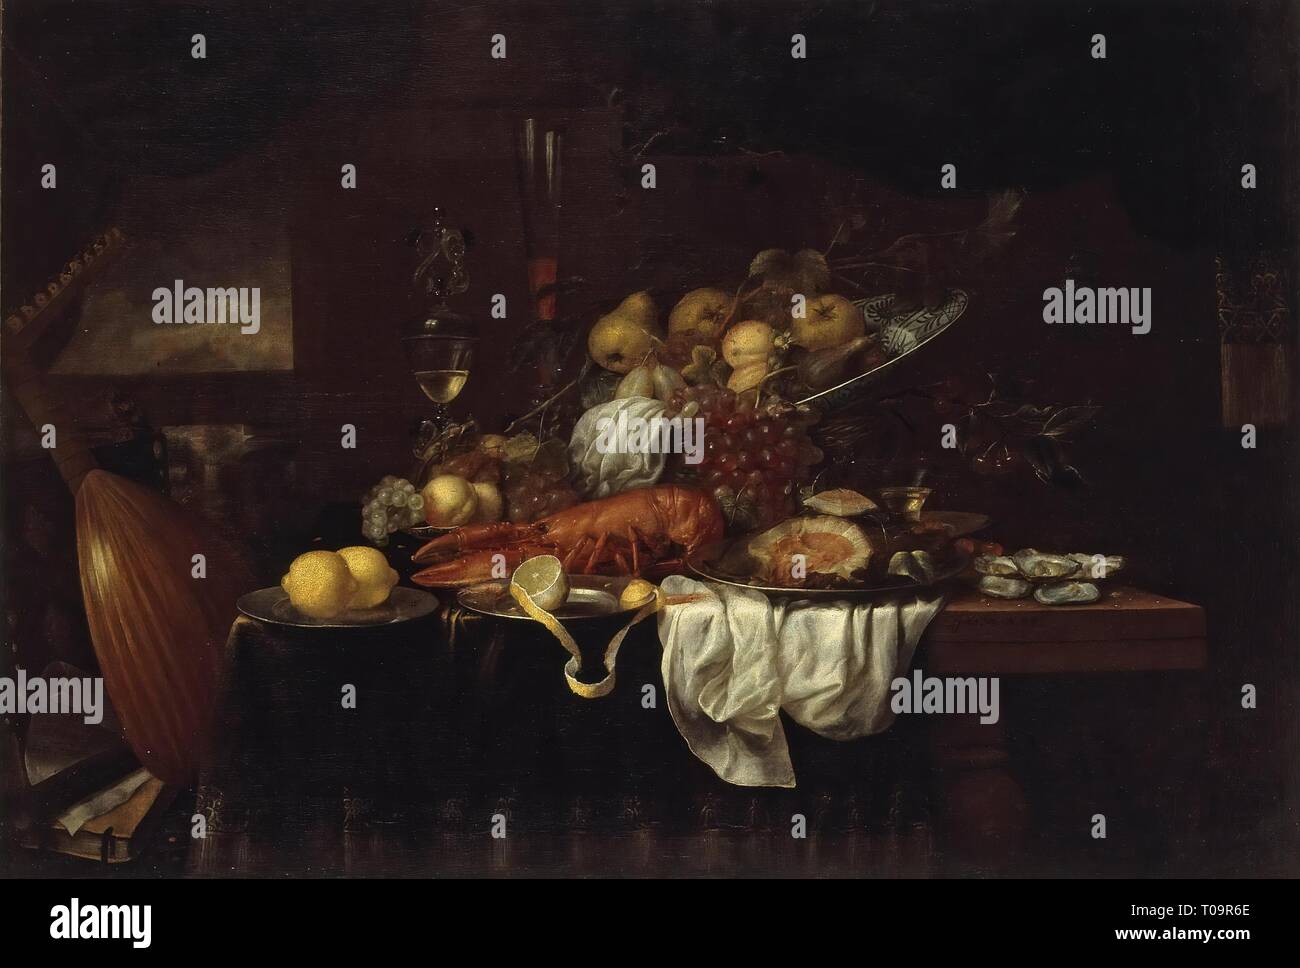 'Lobster, Oysters and Fruit on the Table'. Flanders, 1650s. Dimensions: 118x170 cm. Museum: State Hermitage, St. Petersburg. Author: JORIS VAN SON. Stock Photo